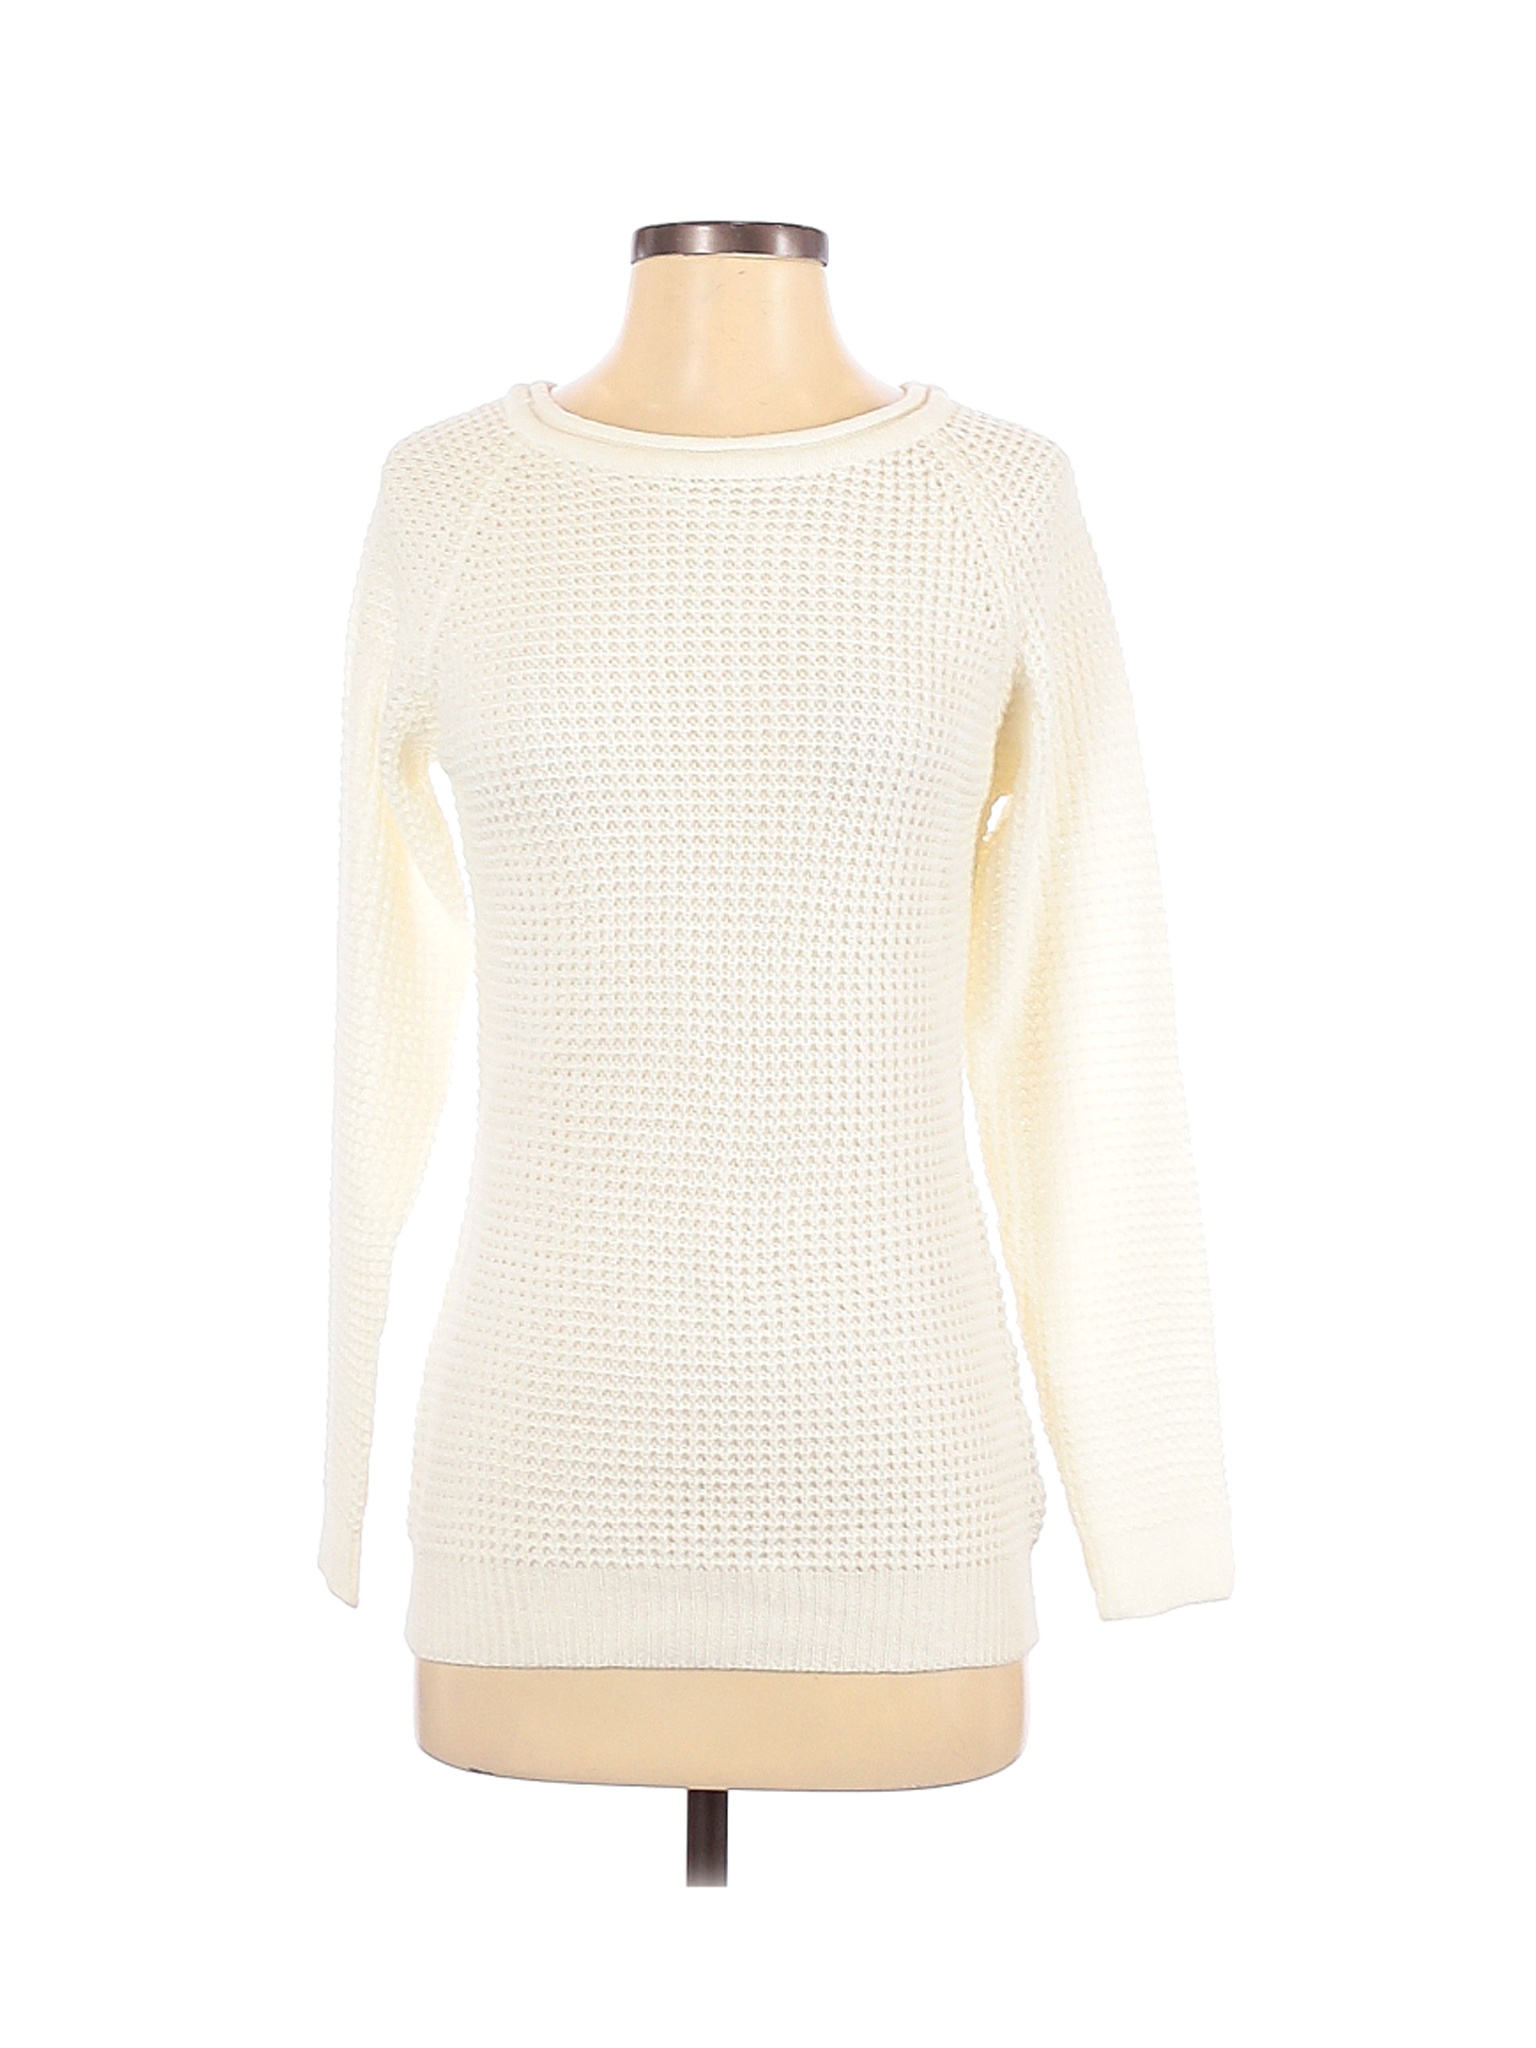 Ambiance Apparel Women White Pullover Sweater S | eBay